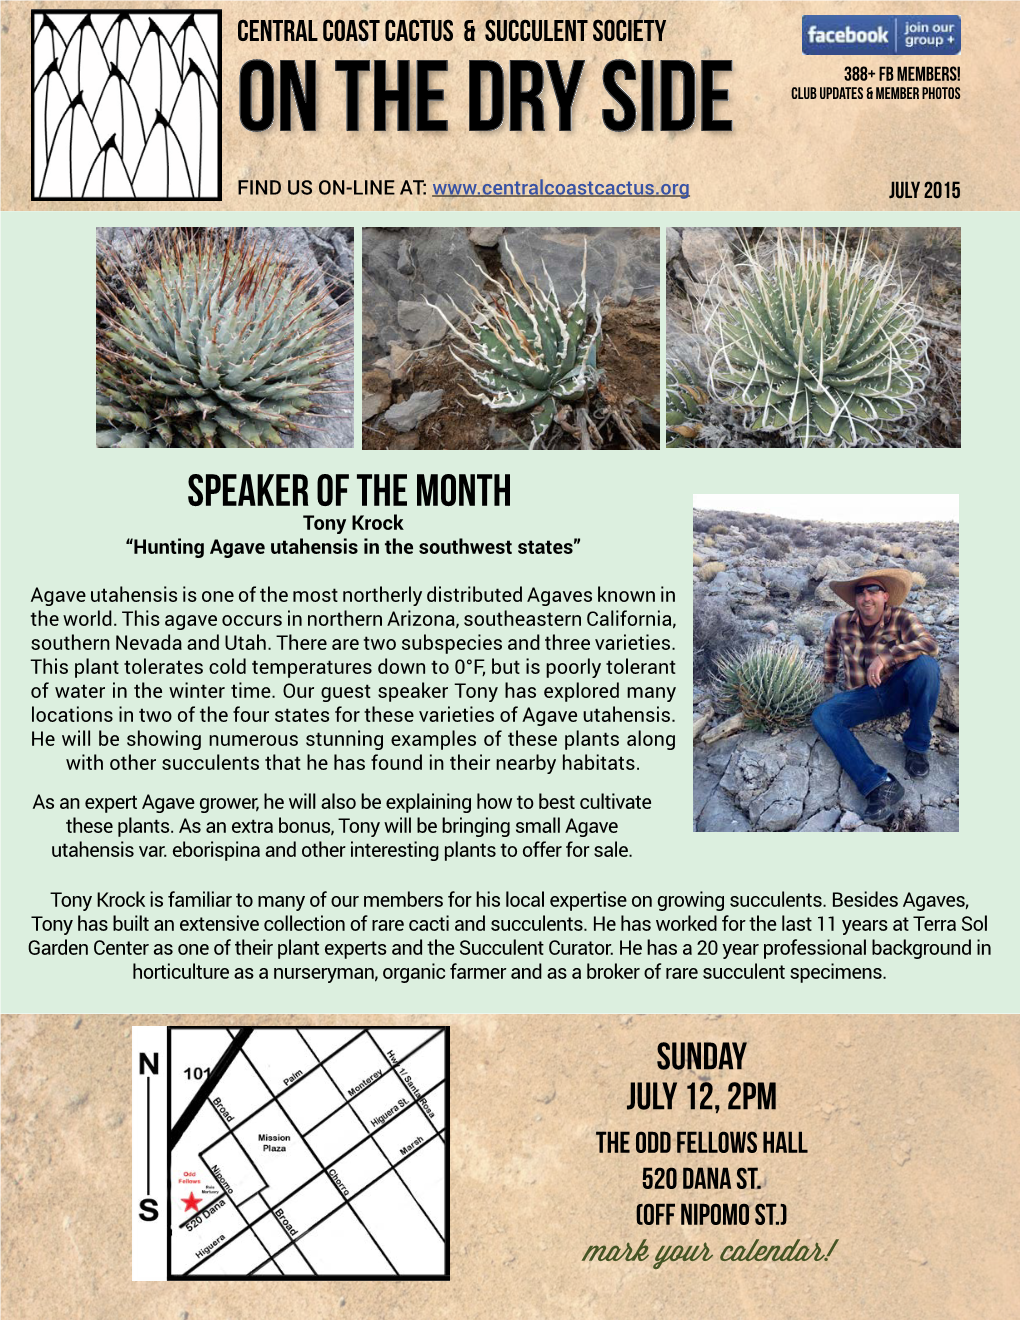 SPEAKER of the MONTH Tony Krock “Hunting Agave Utahensis in the Southwest States”